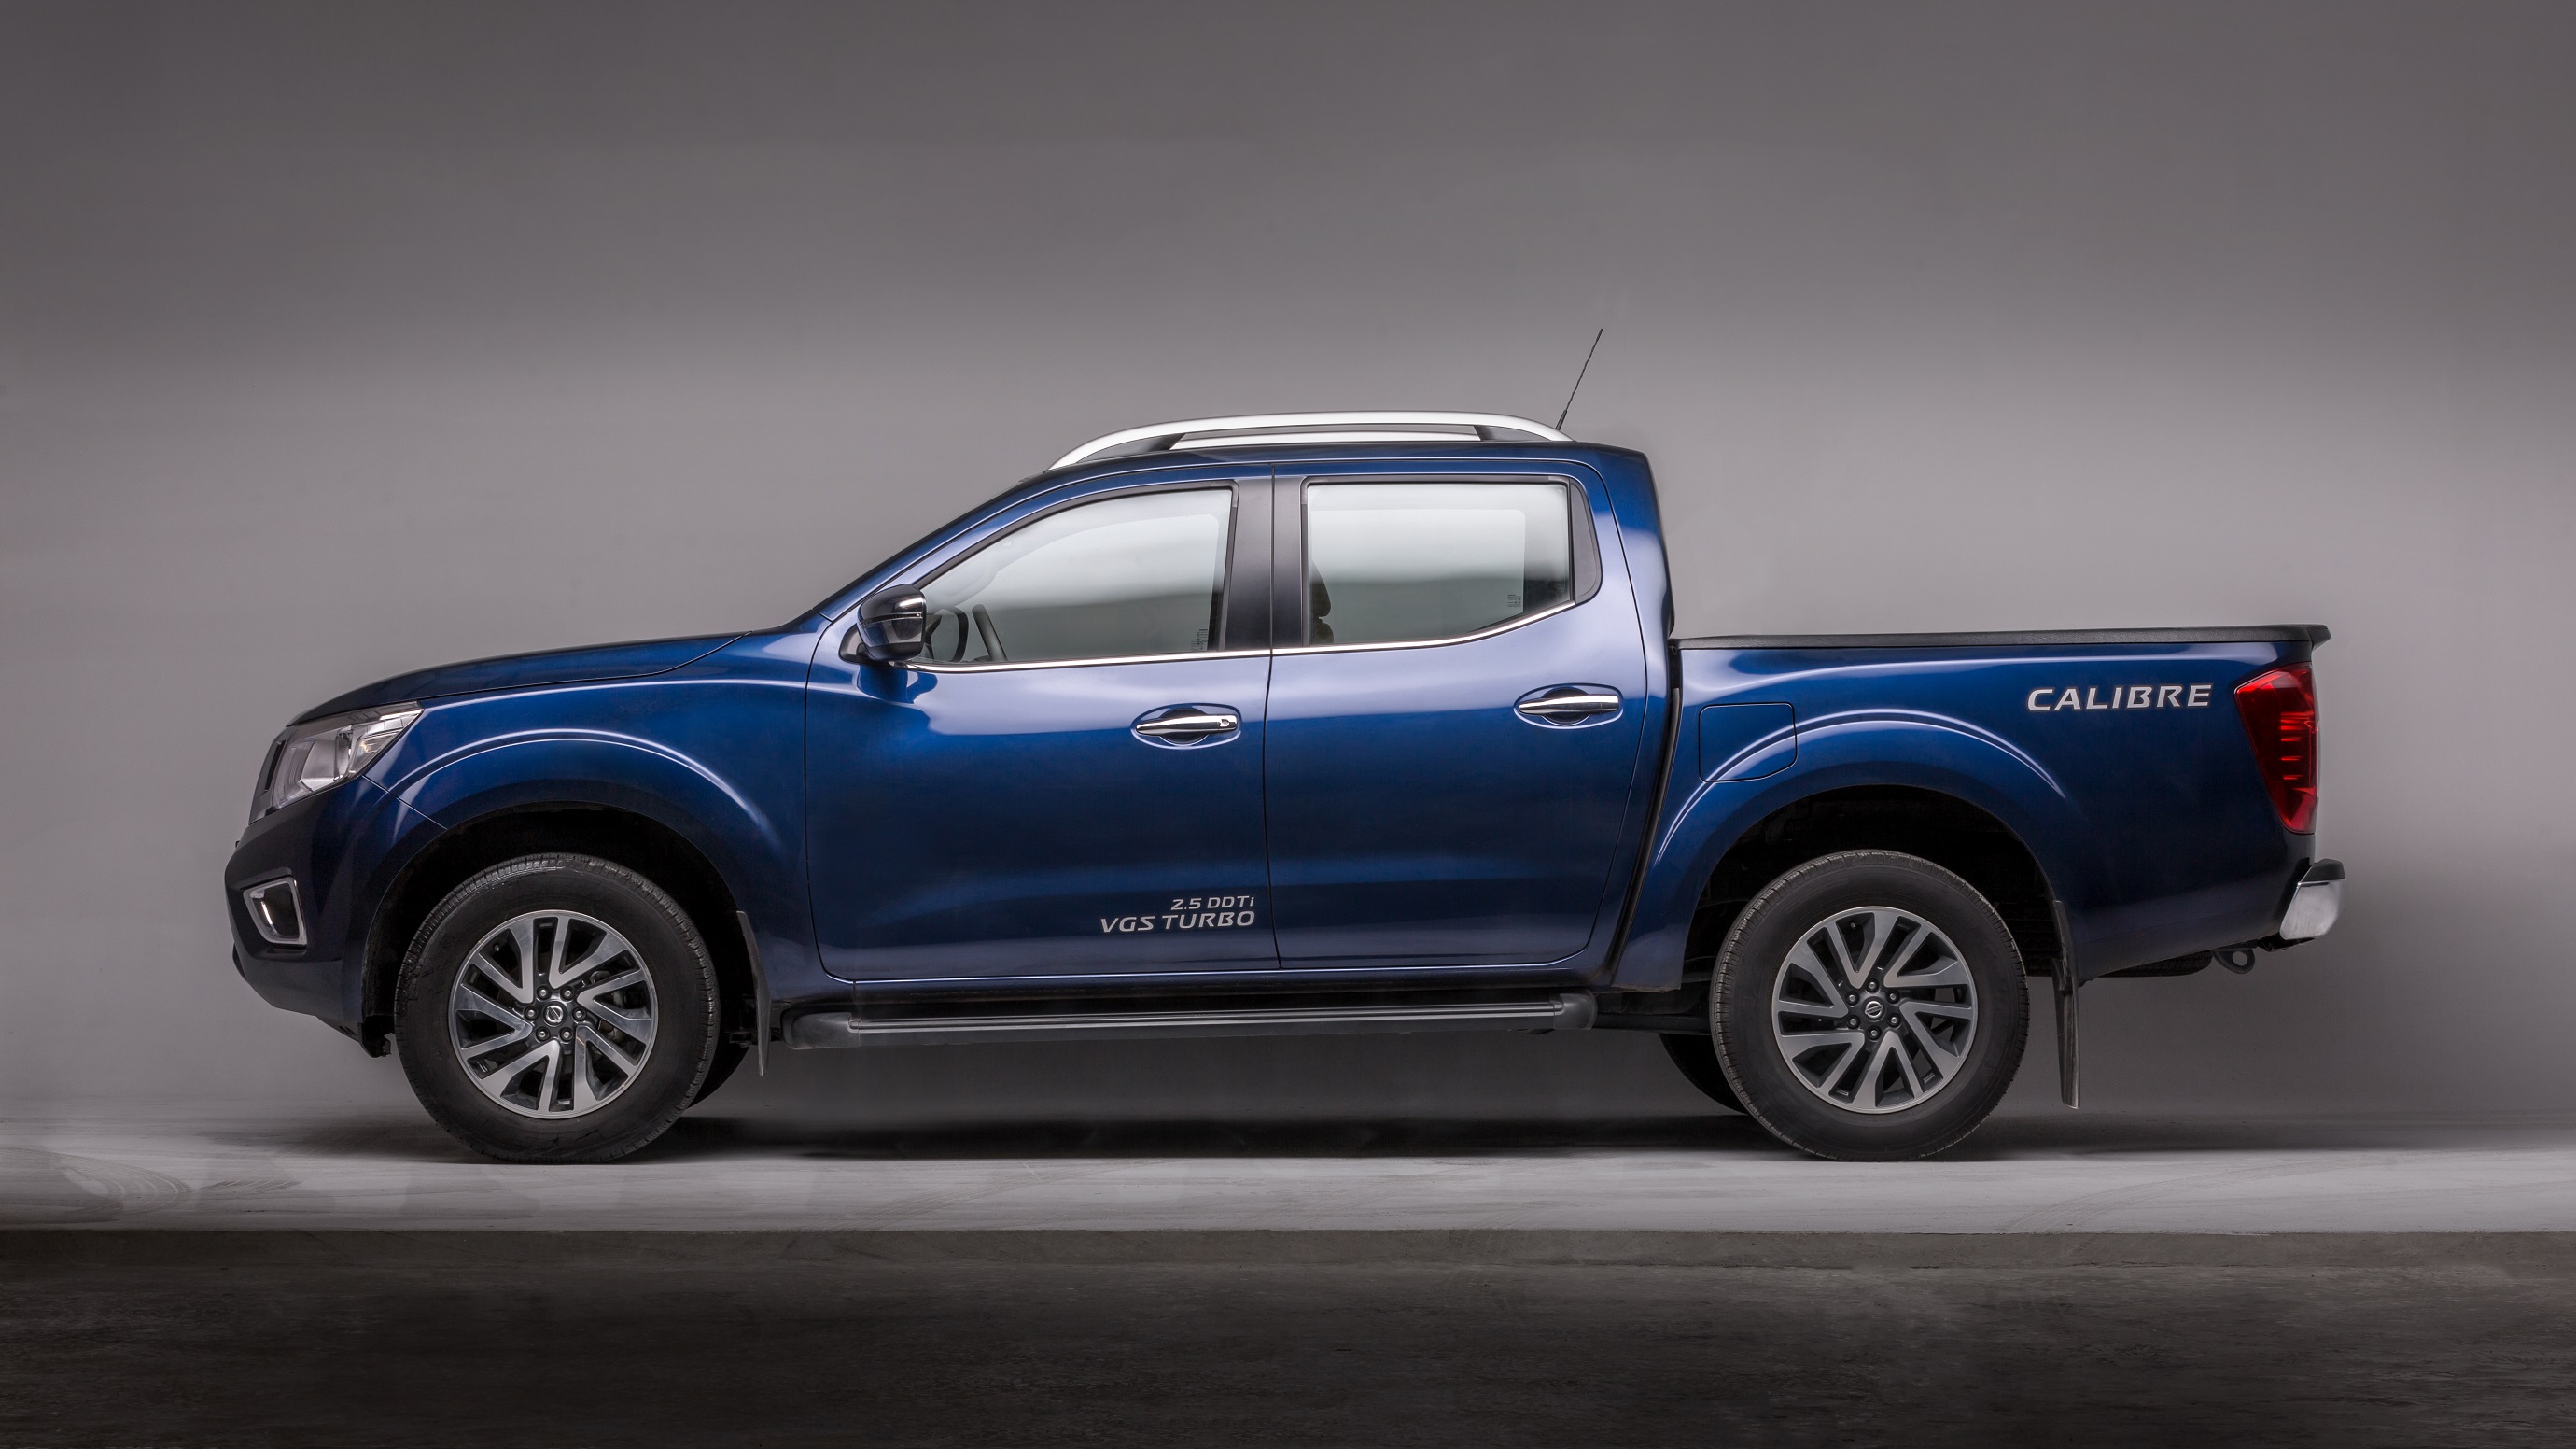 2019 Nissan Navara price hiked owing to new infotainment system